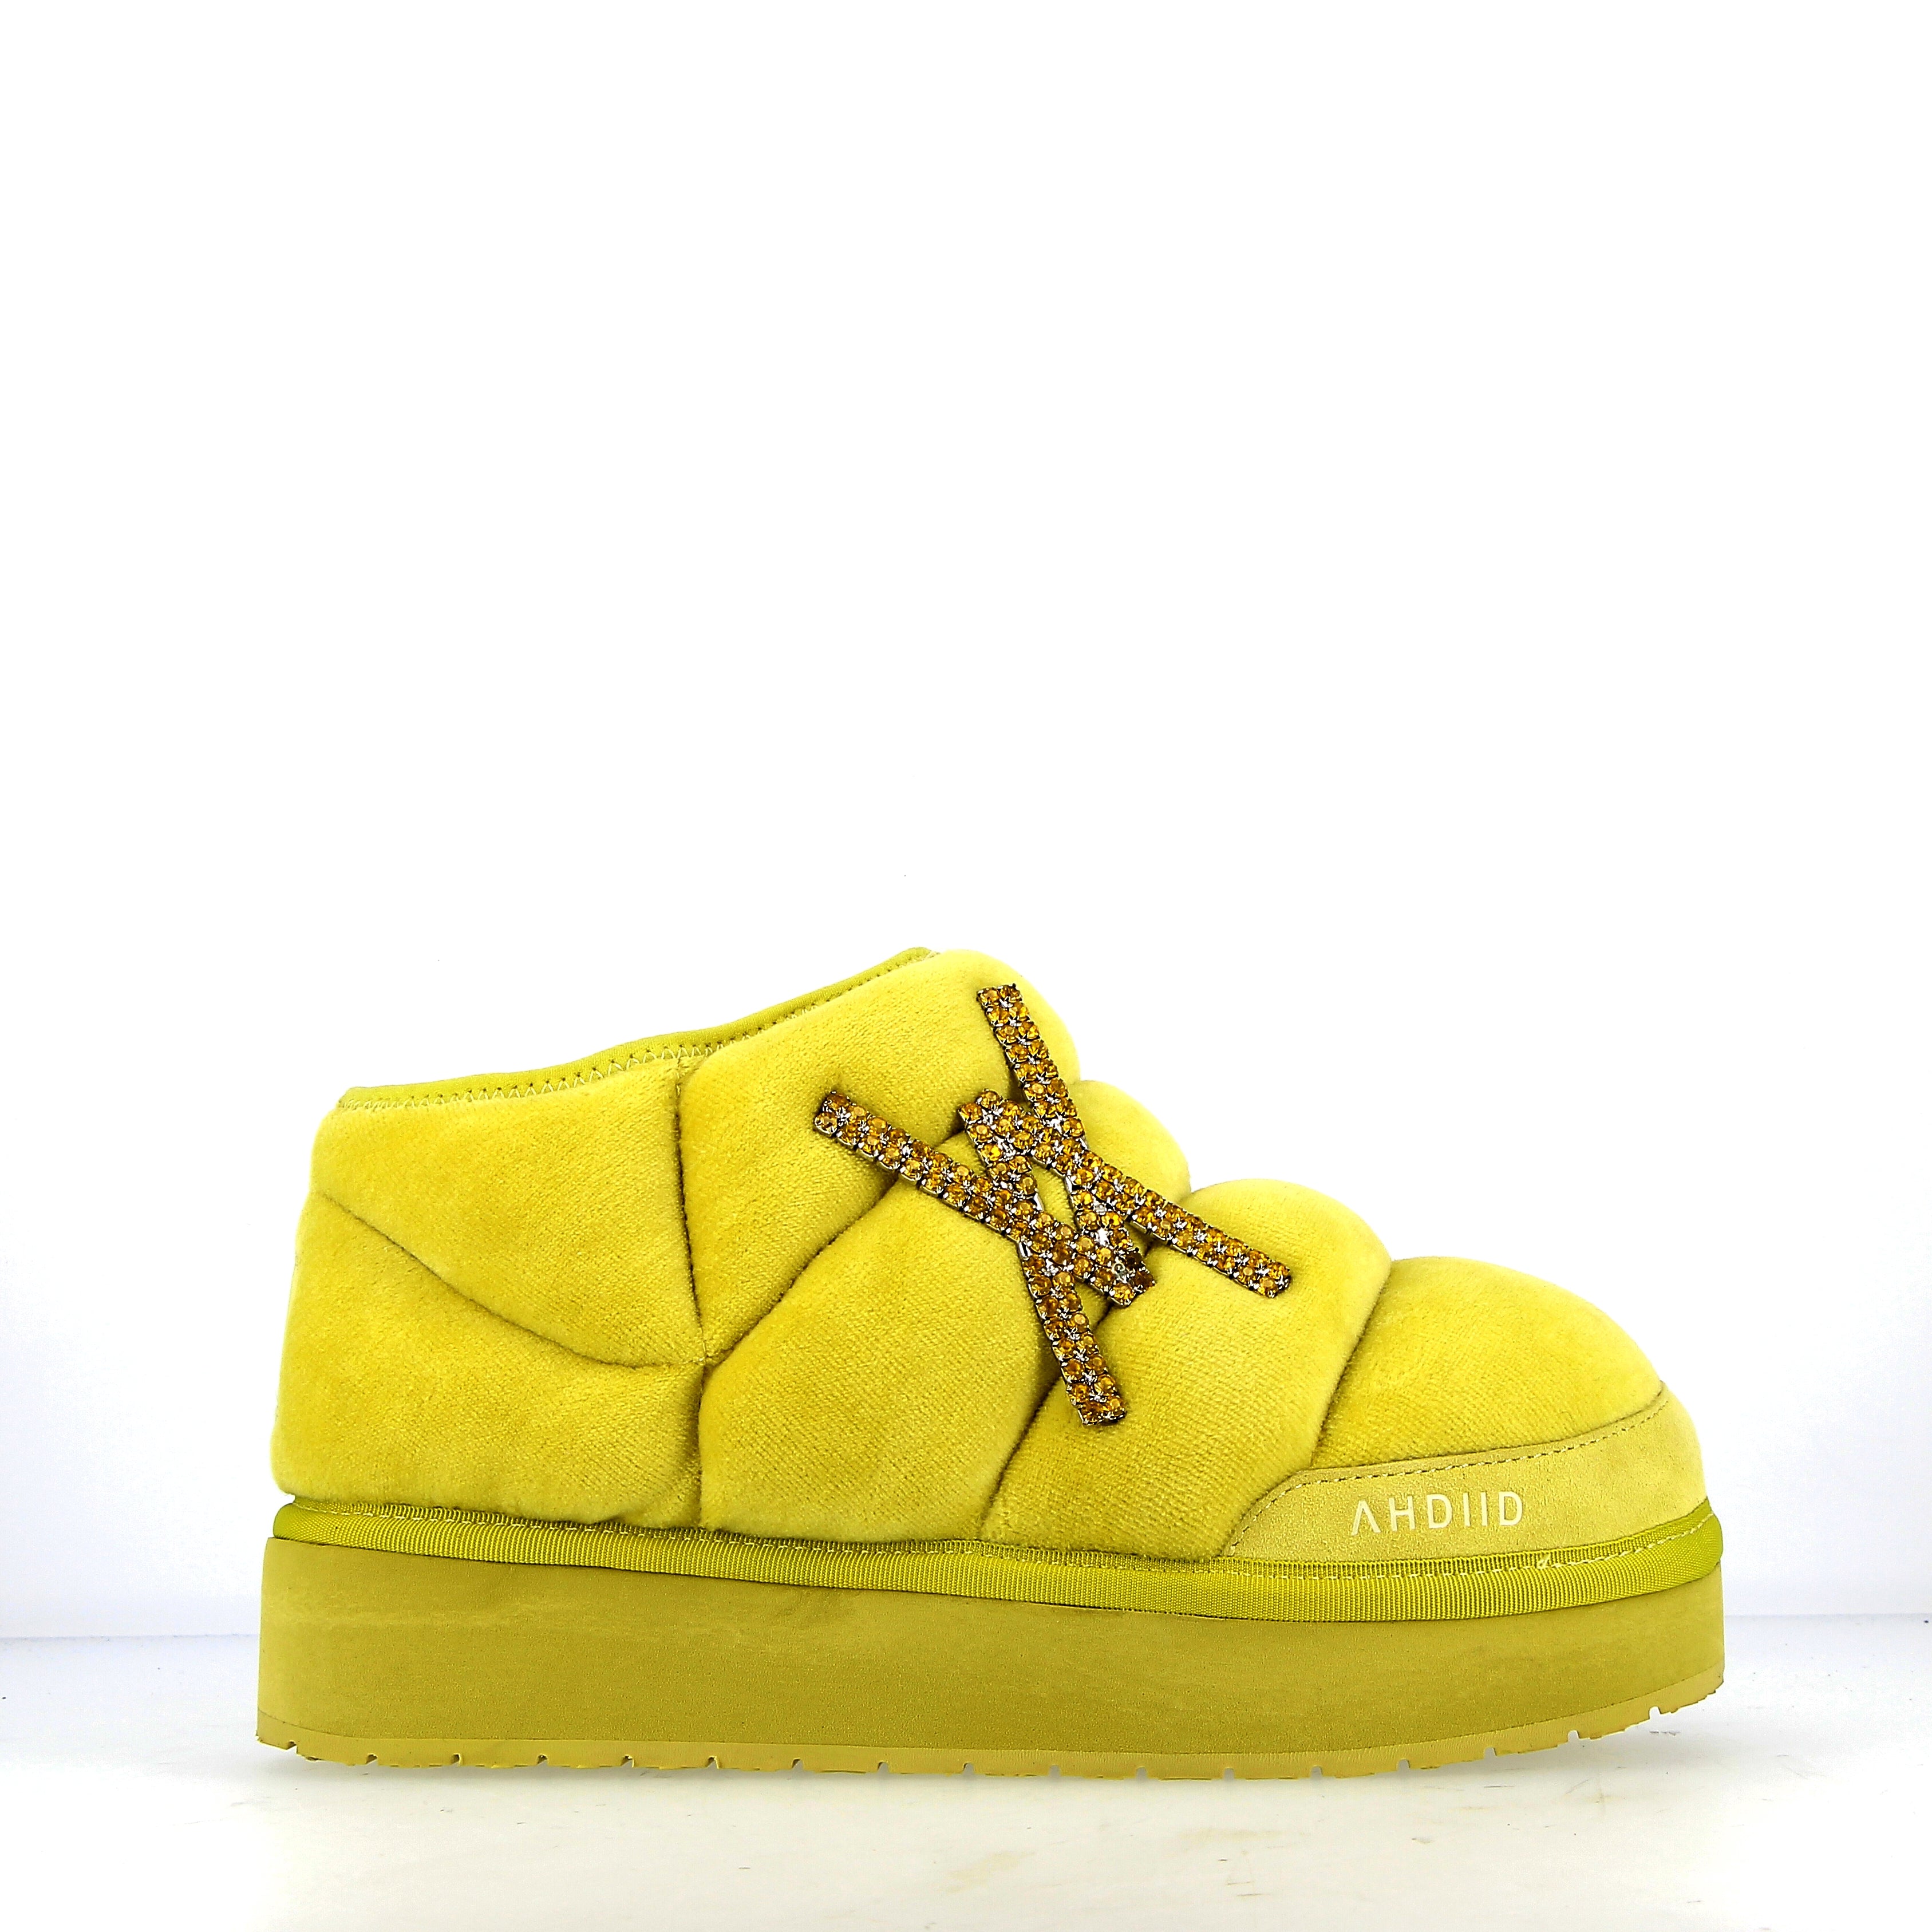 Low shoe Lime fur interior with embellishment